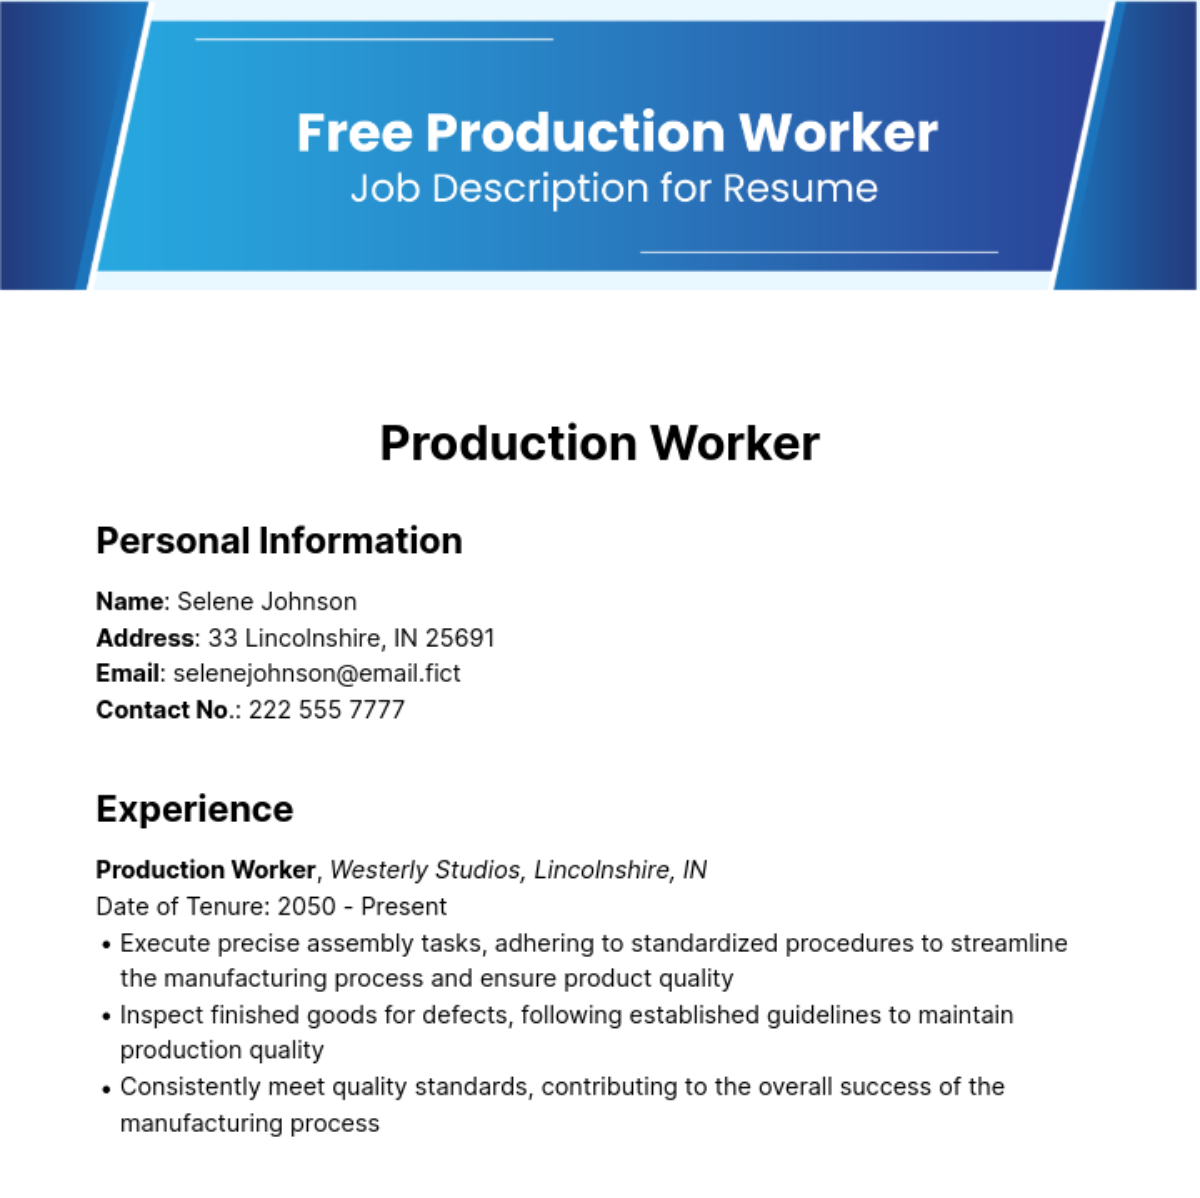 Free Production Worker Job Description for Resume Template